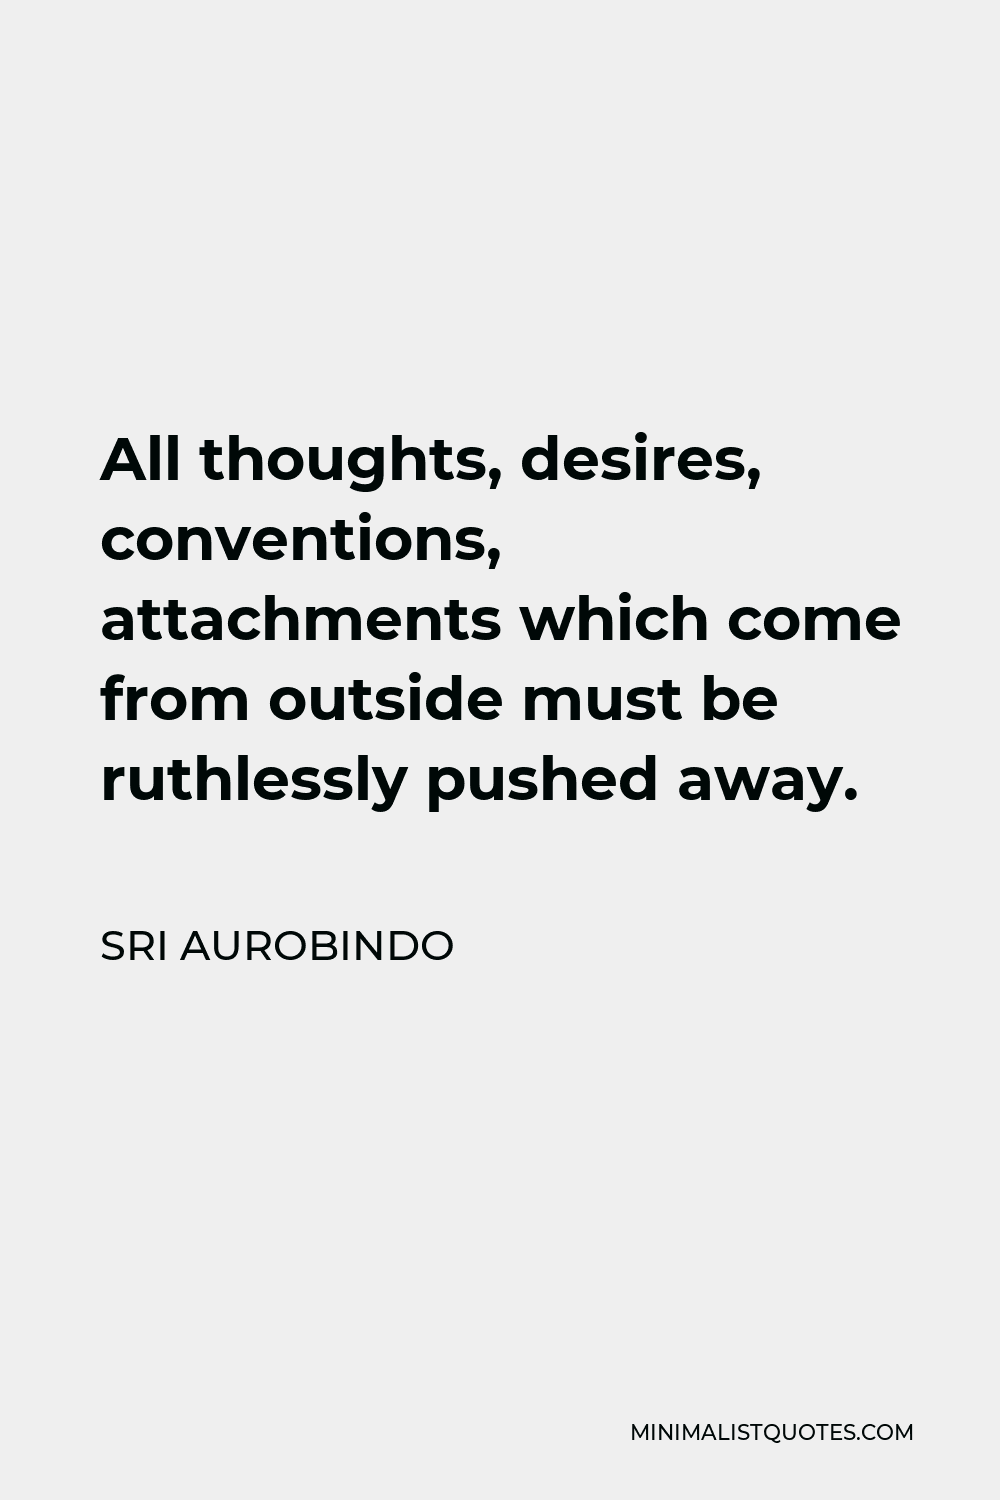 Sri Aurobindo Quote - All thoughts, desires, conventions, attachments which come from outside must be ruthlessly pushed away.